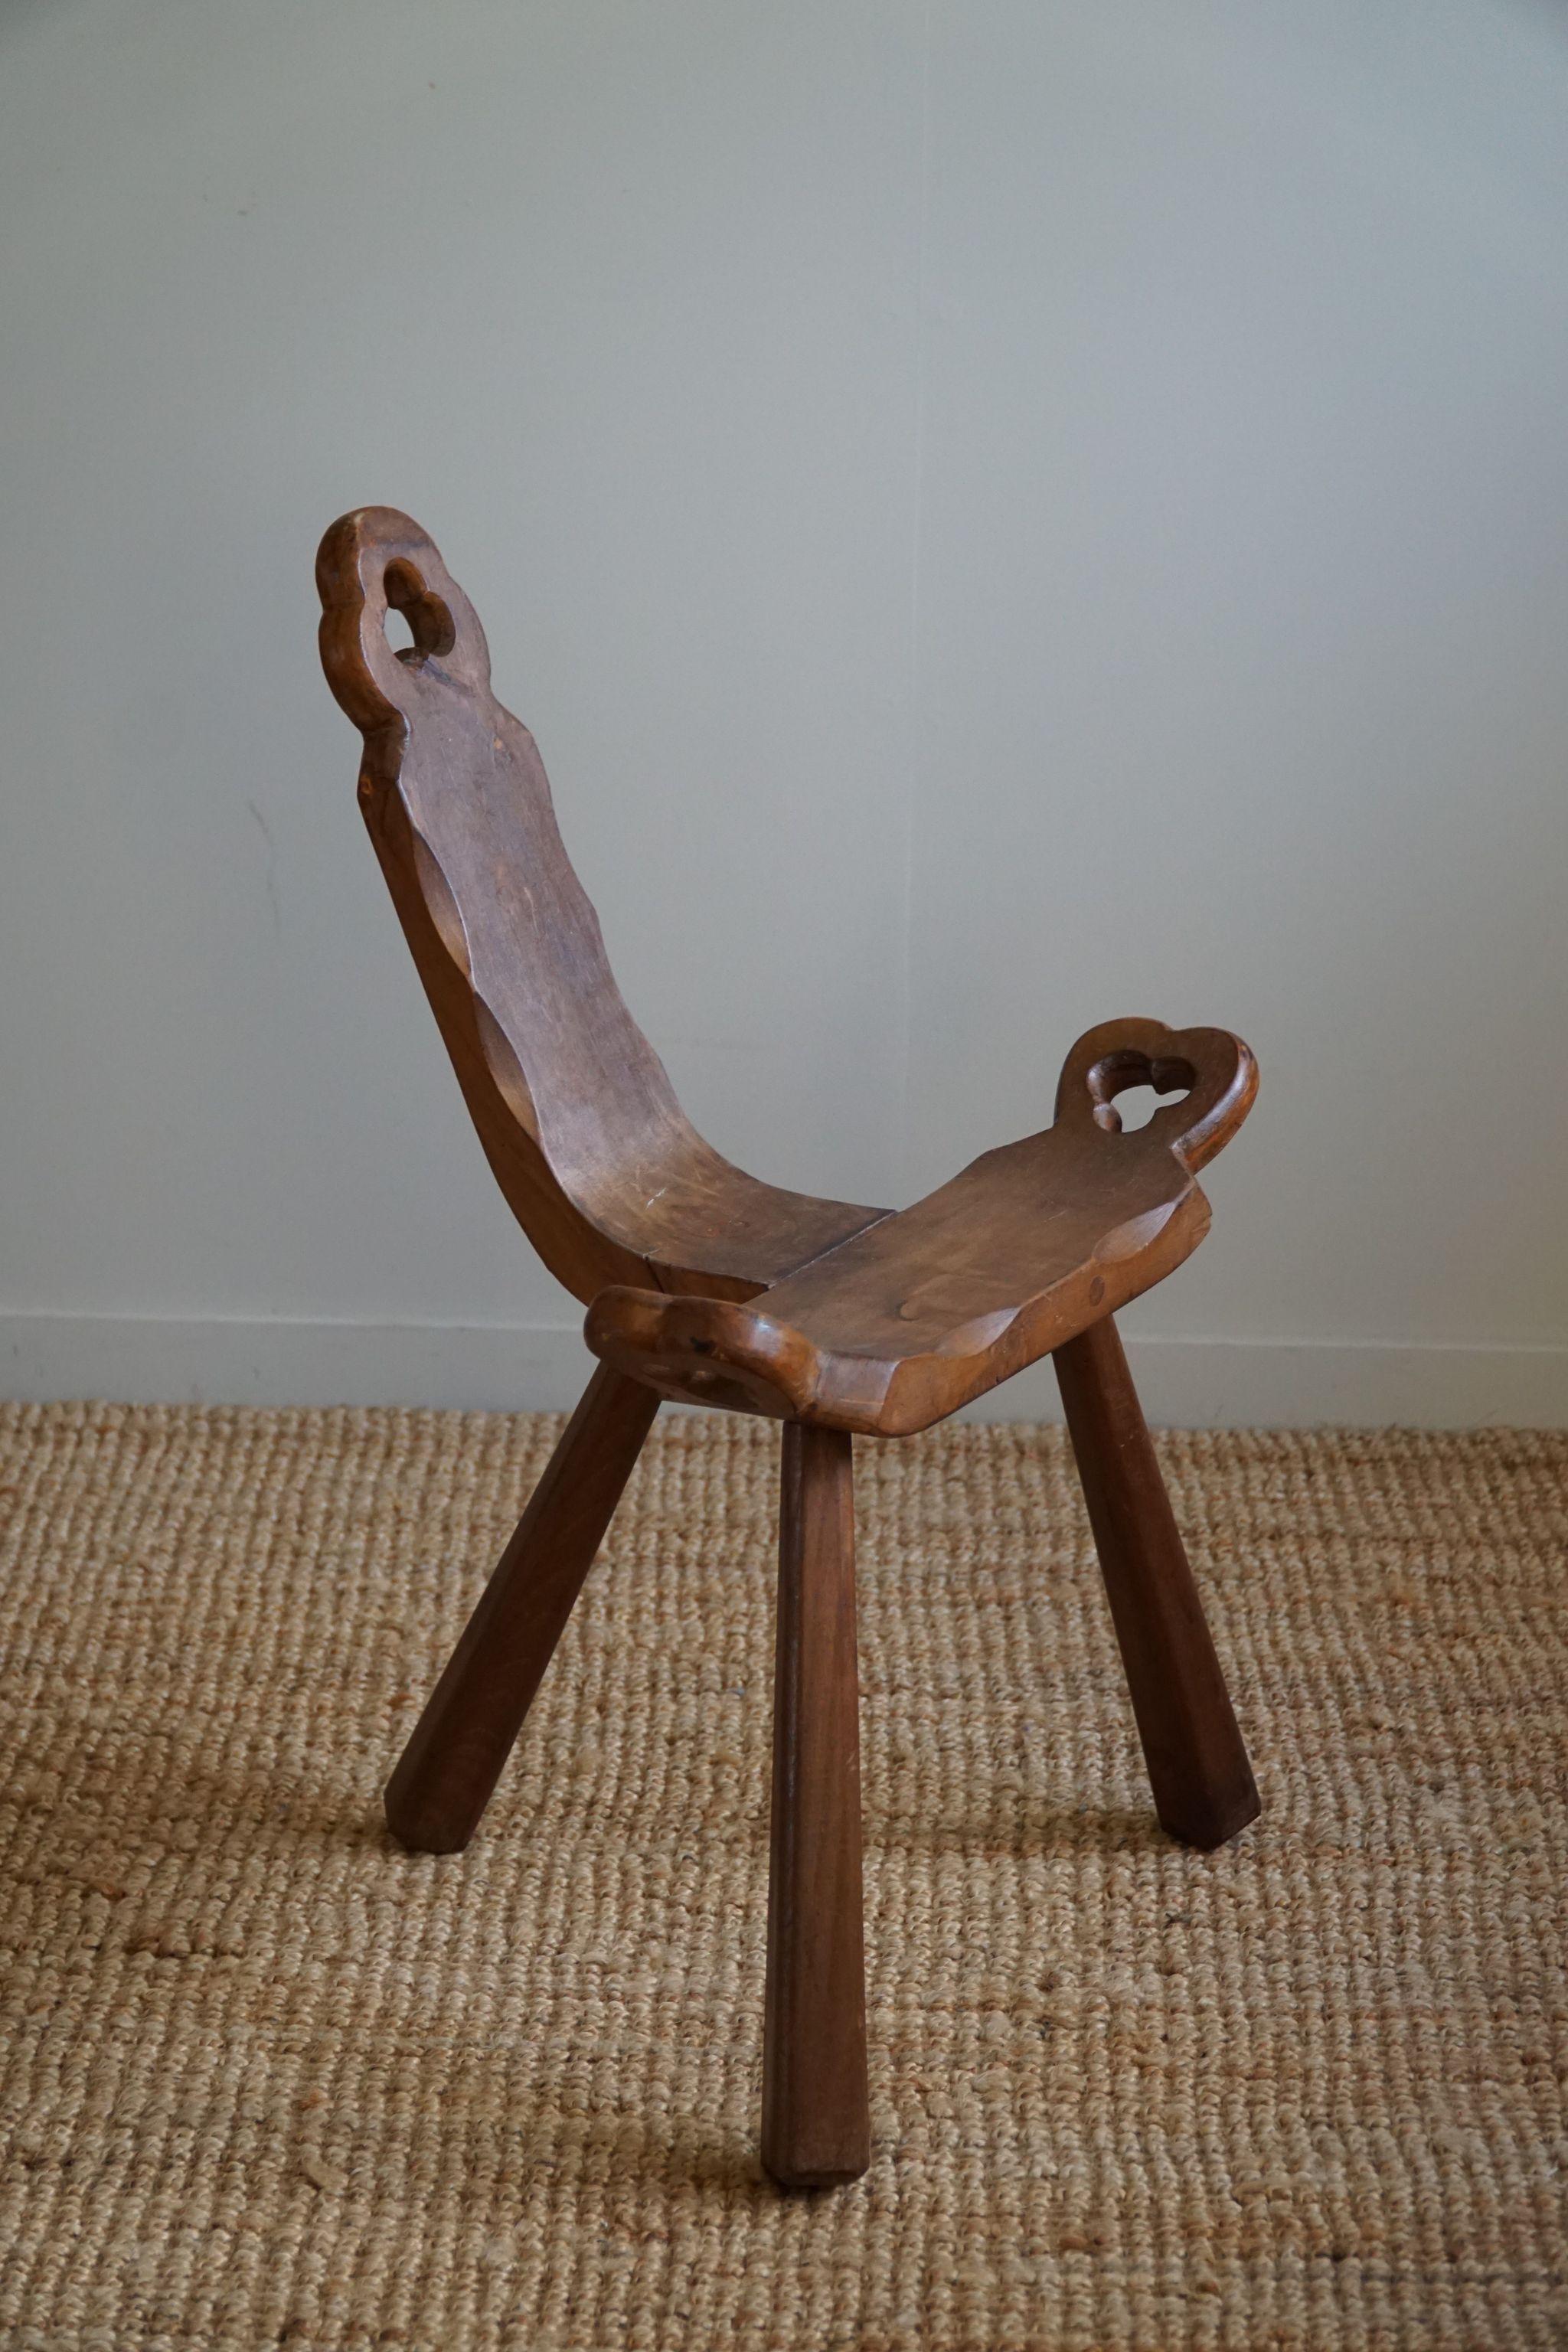 Primitive French Wooden Carved Tripod Chair, Wabi Sabi Style, Early 20th Century 8